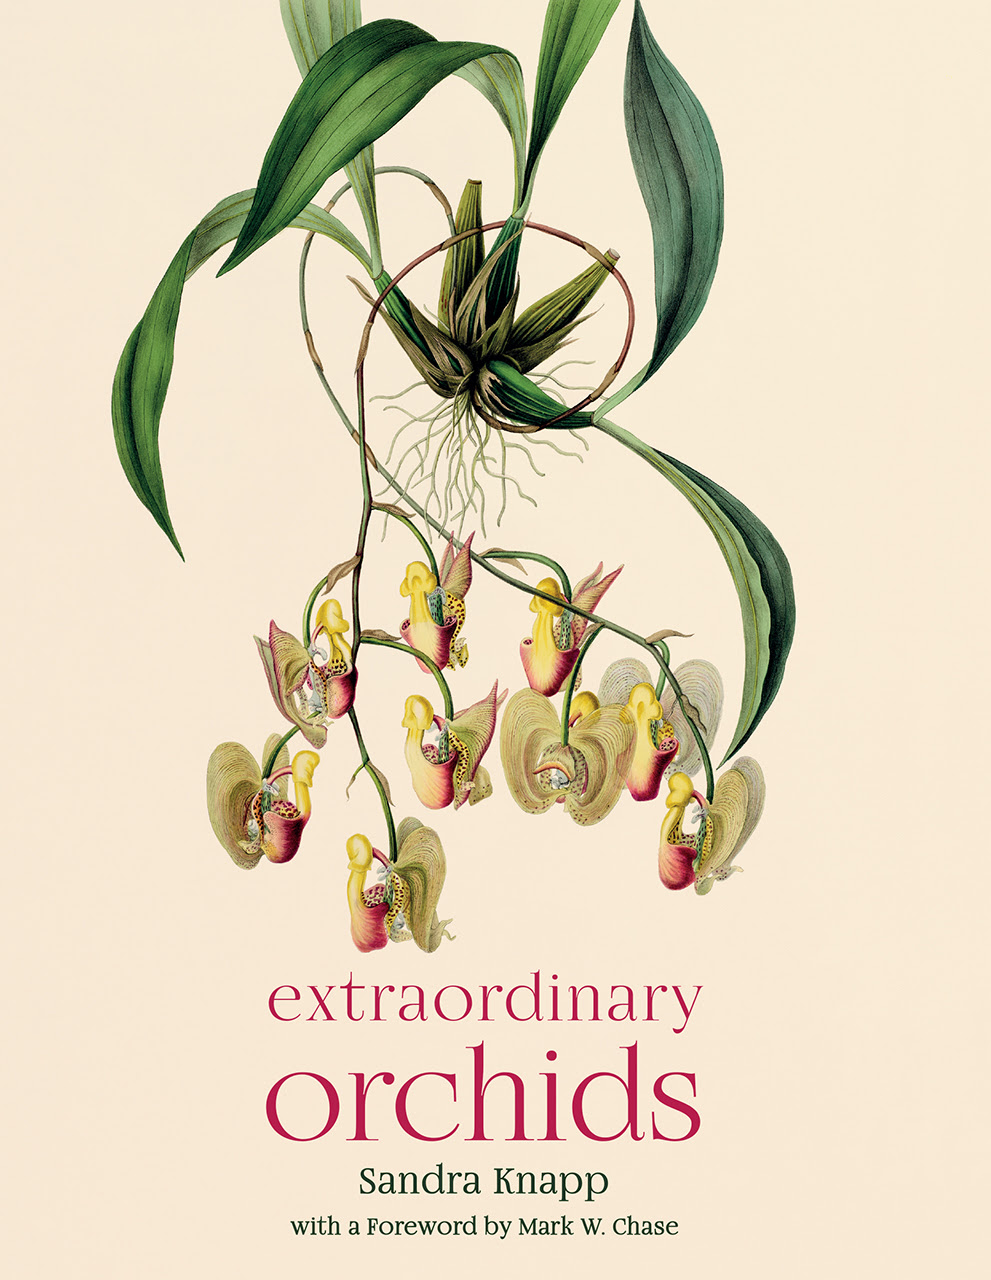 Extraordinary Orchids in Kindle/PDF/EPUB